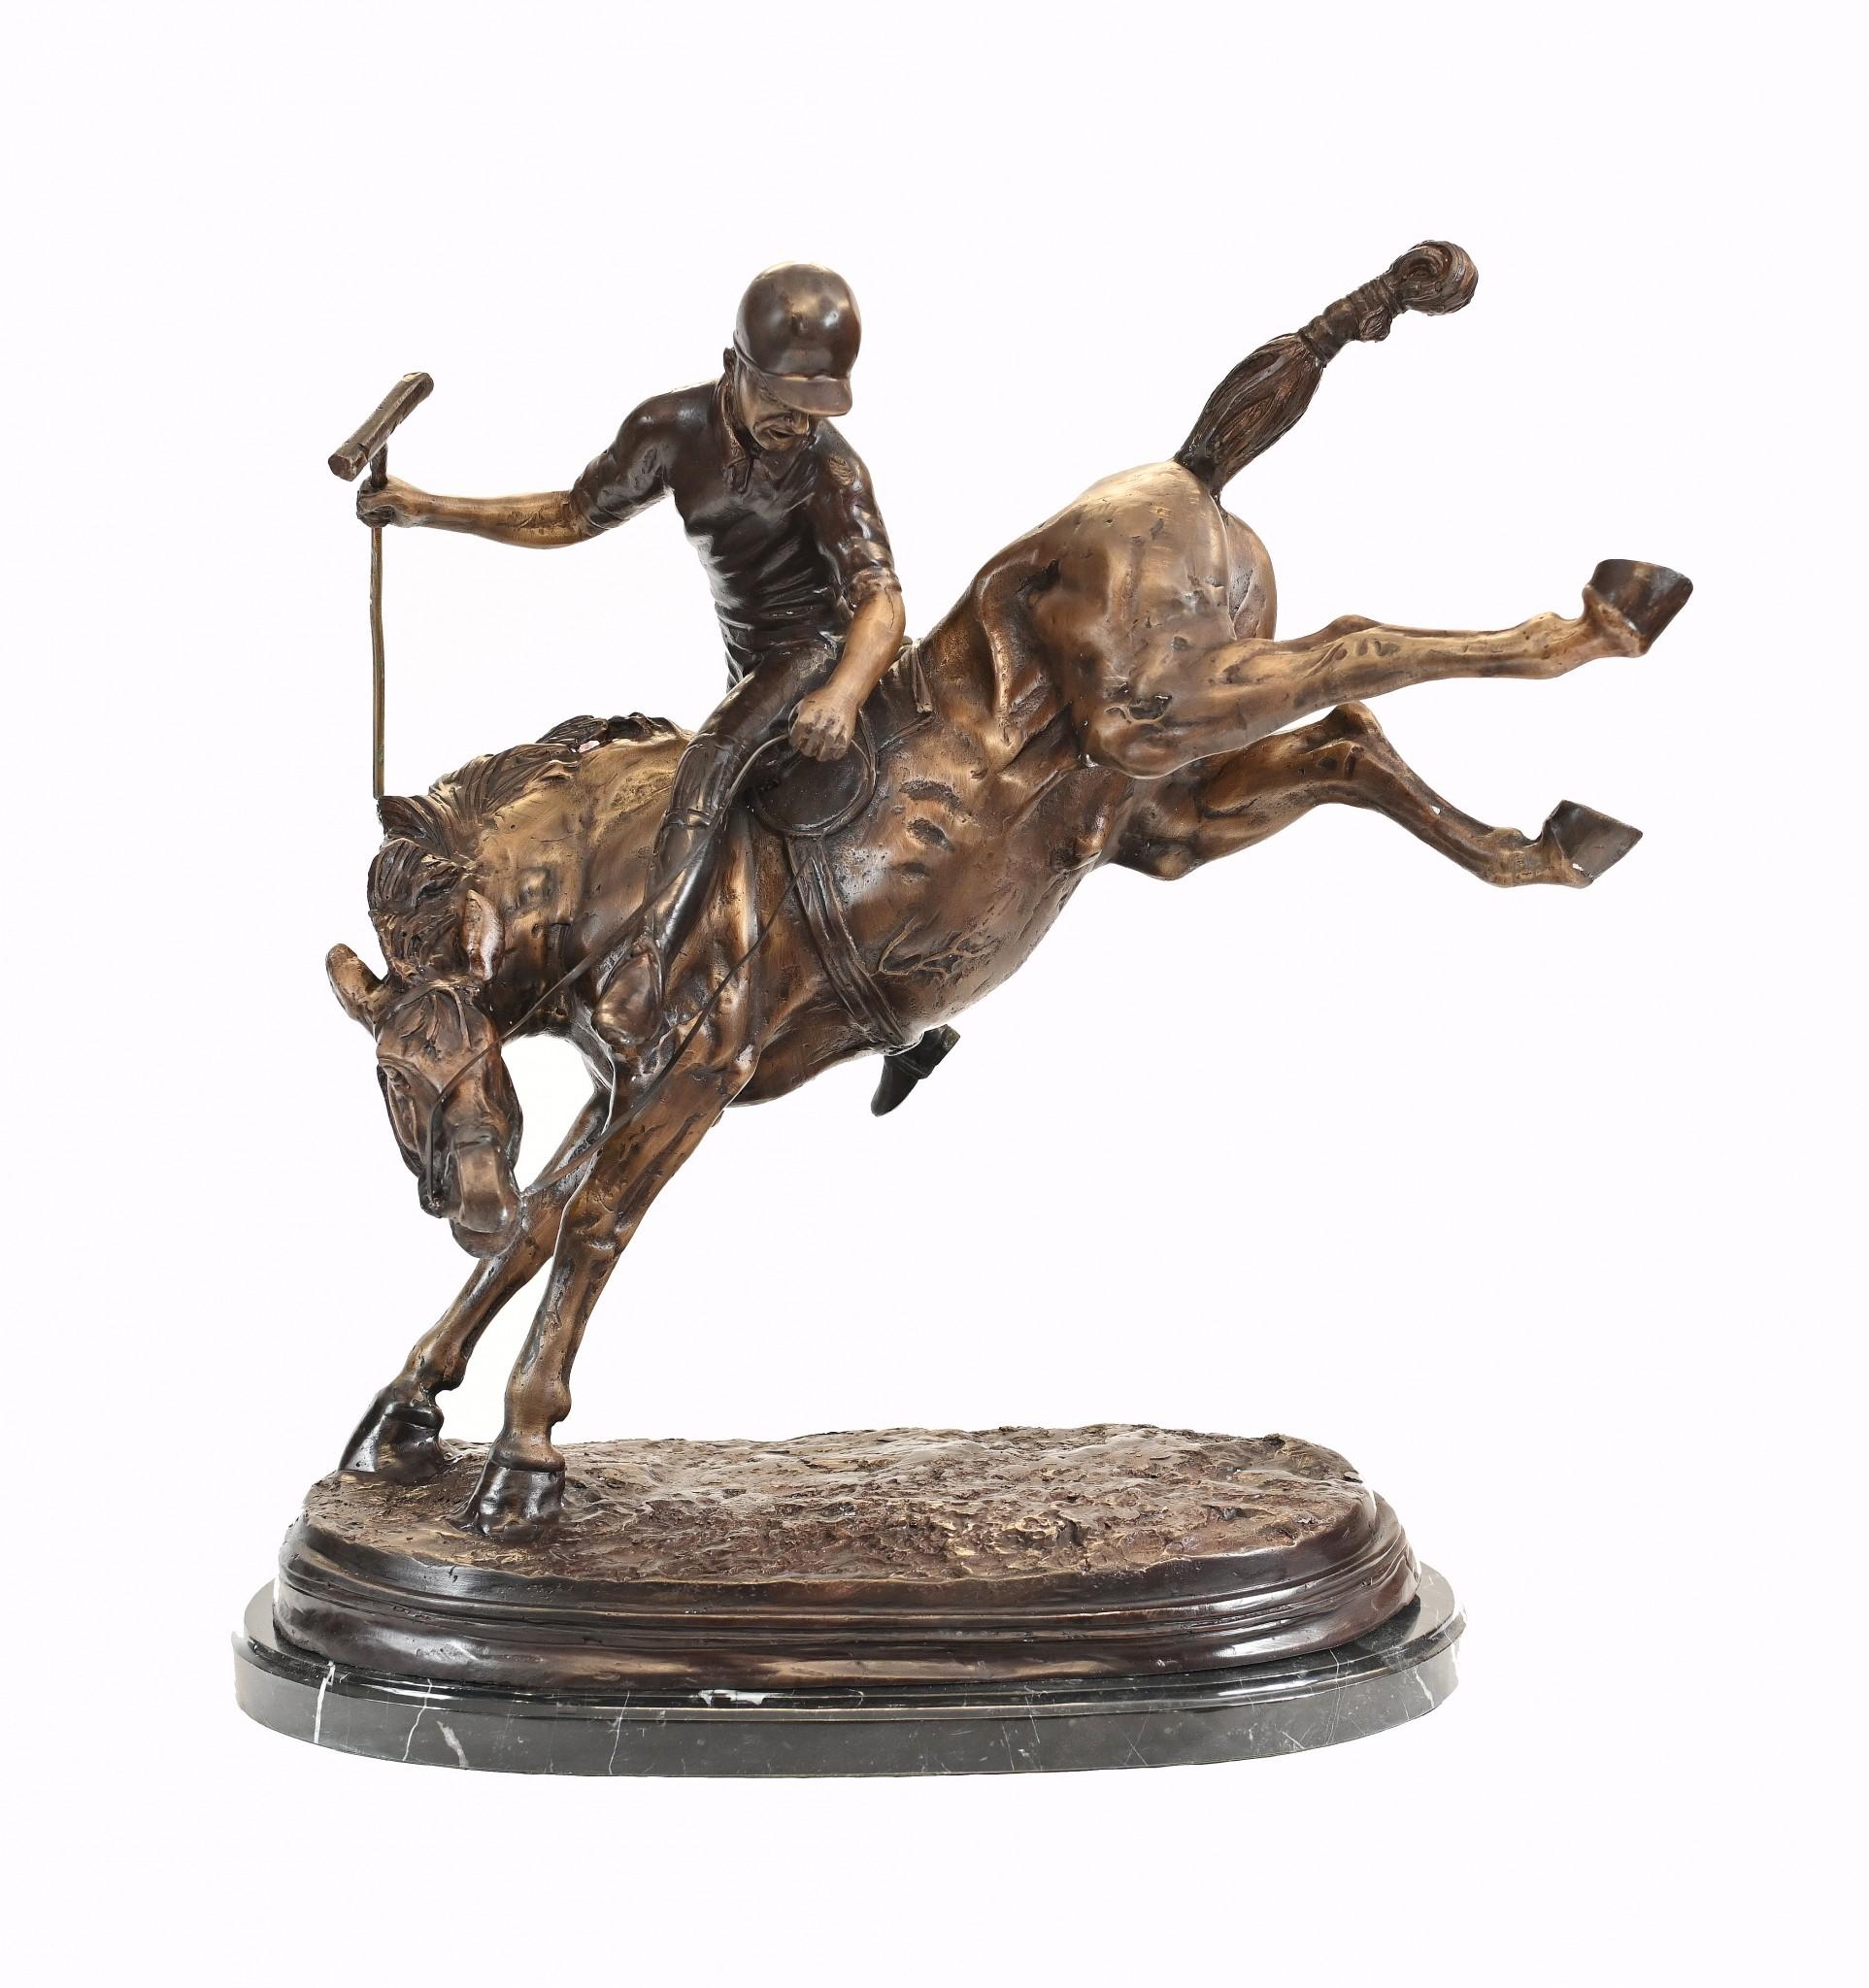 Stunning English Bronze statue showing polo player on a bucking bronze
Stands in at over two feet tall so an impressive work
The patina to the bronze is superb and this is ready to display
No signs of damage or other defects
The artist has really